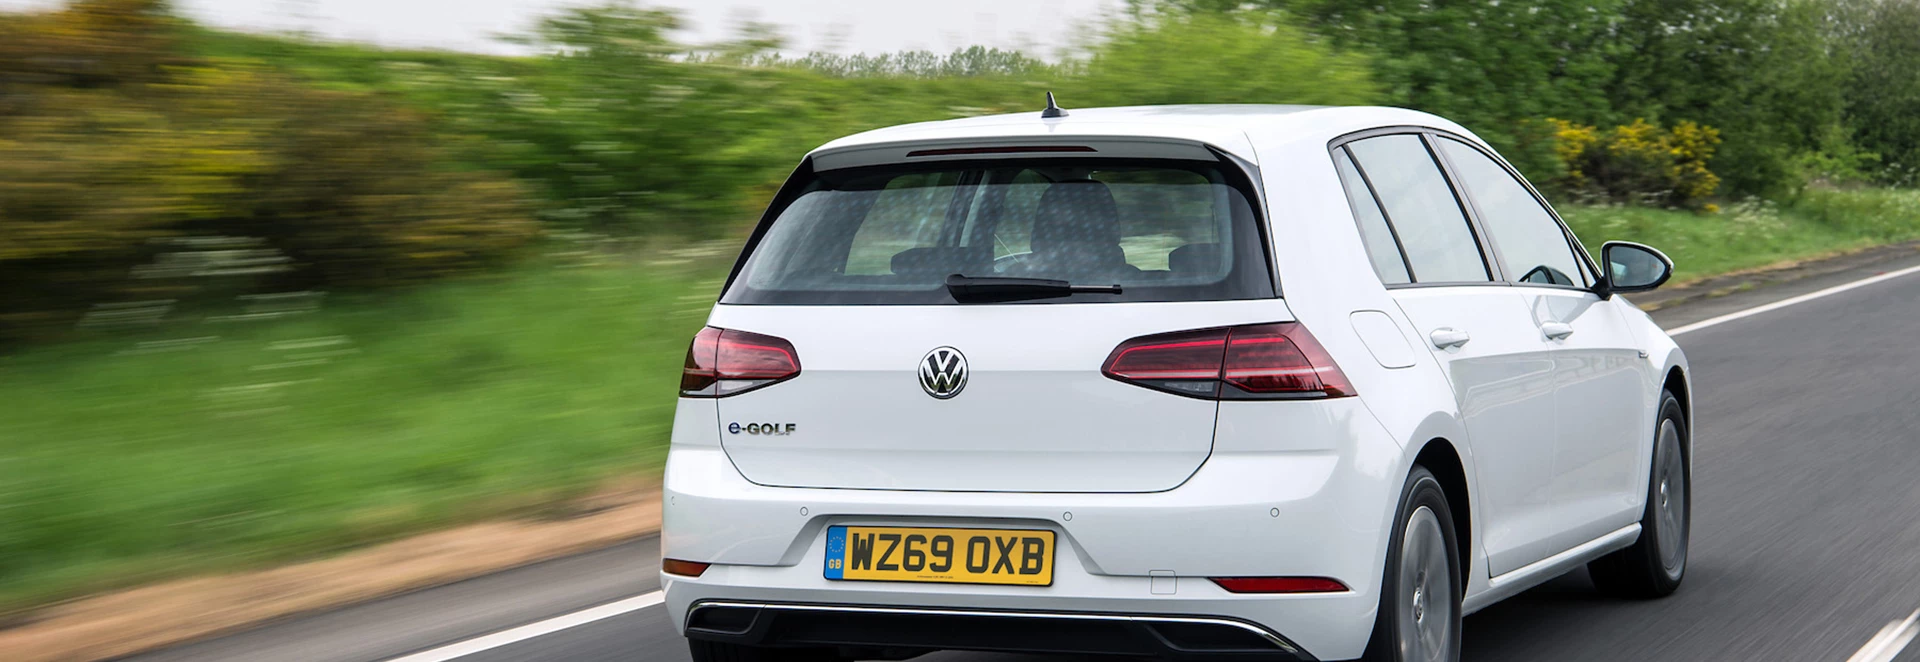 Volkswagen e-Golf EV becomes more attractive with large price cut